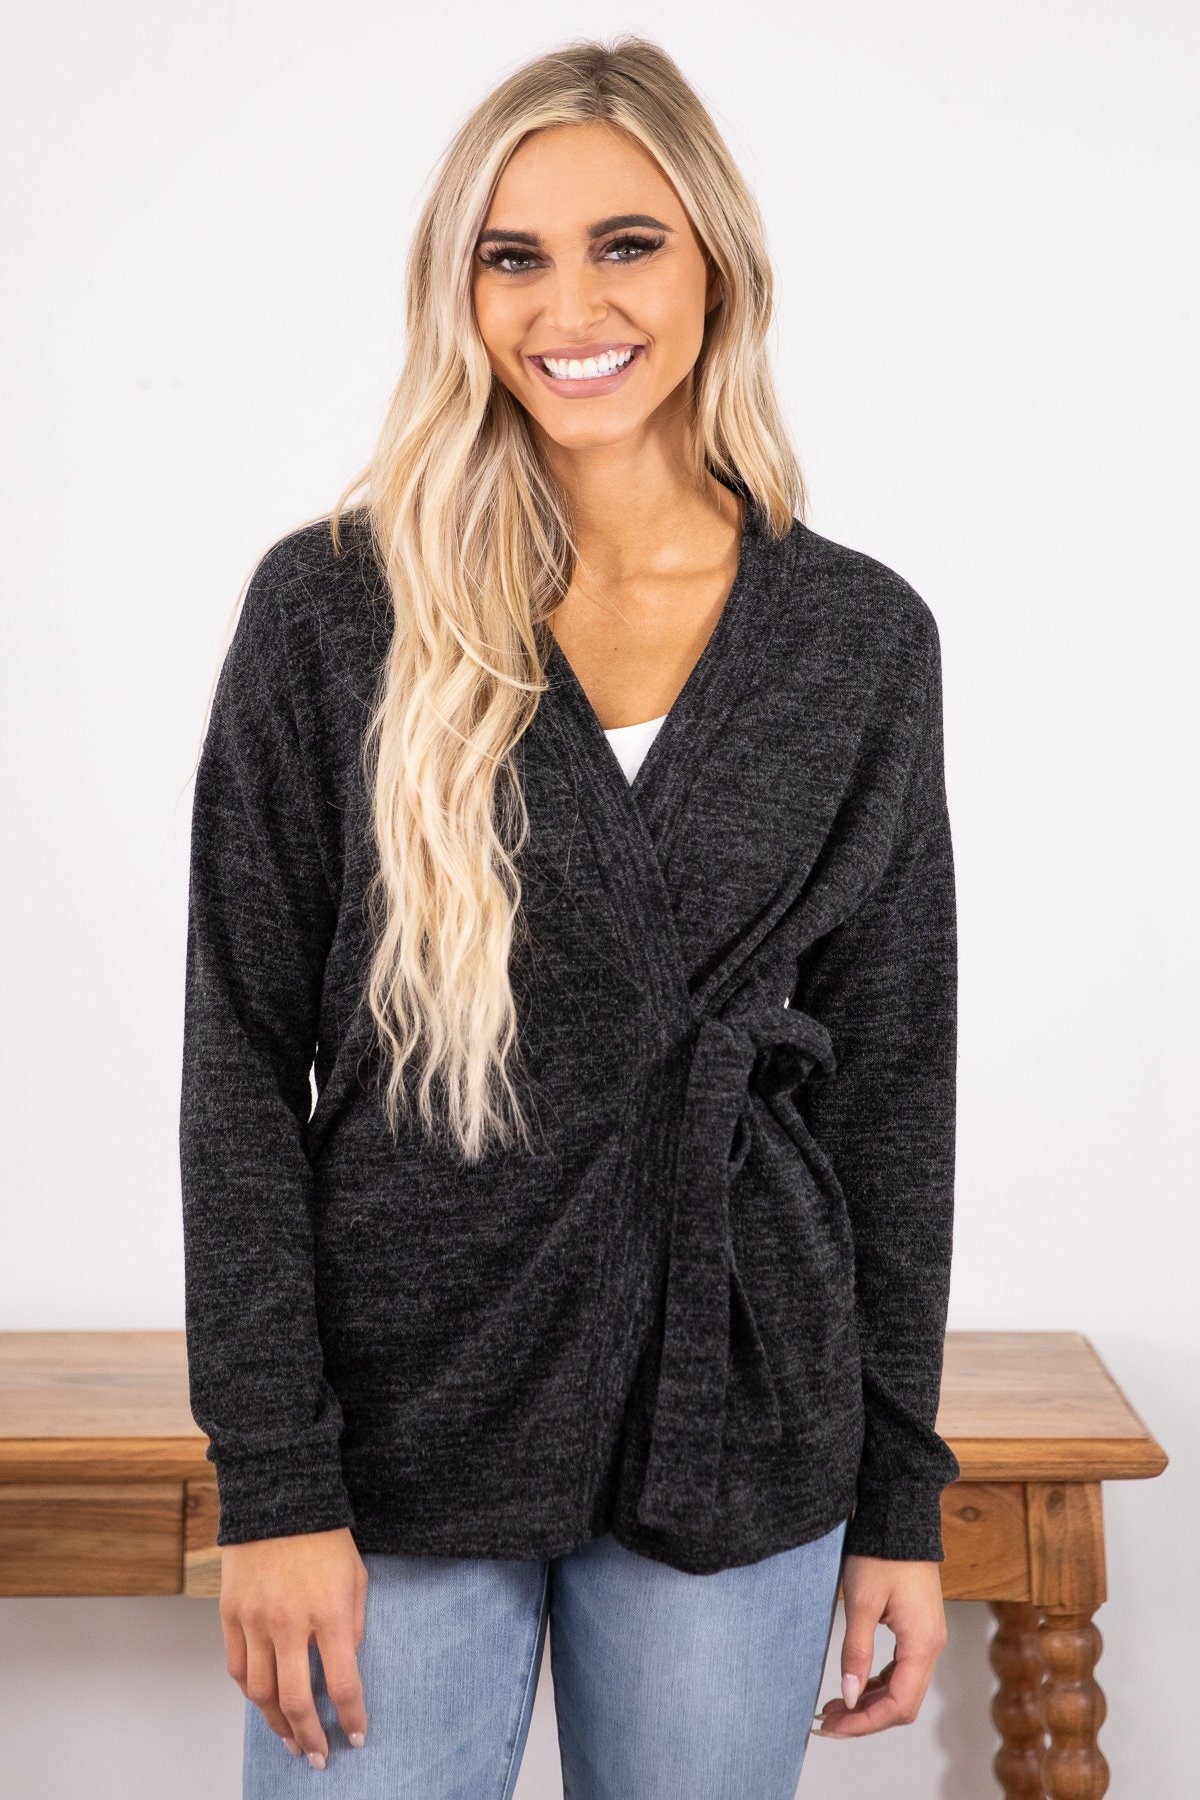 Charcoal Side Tie Cardigan - Filly Flair